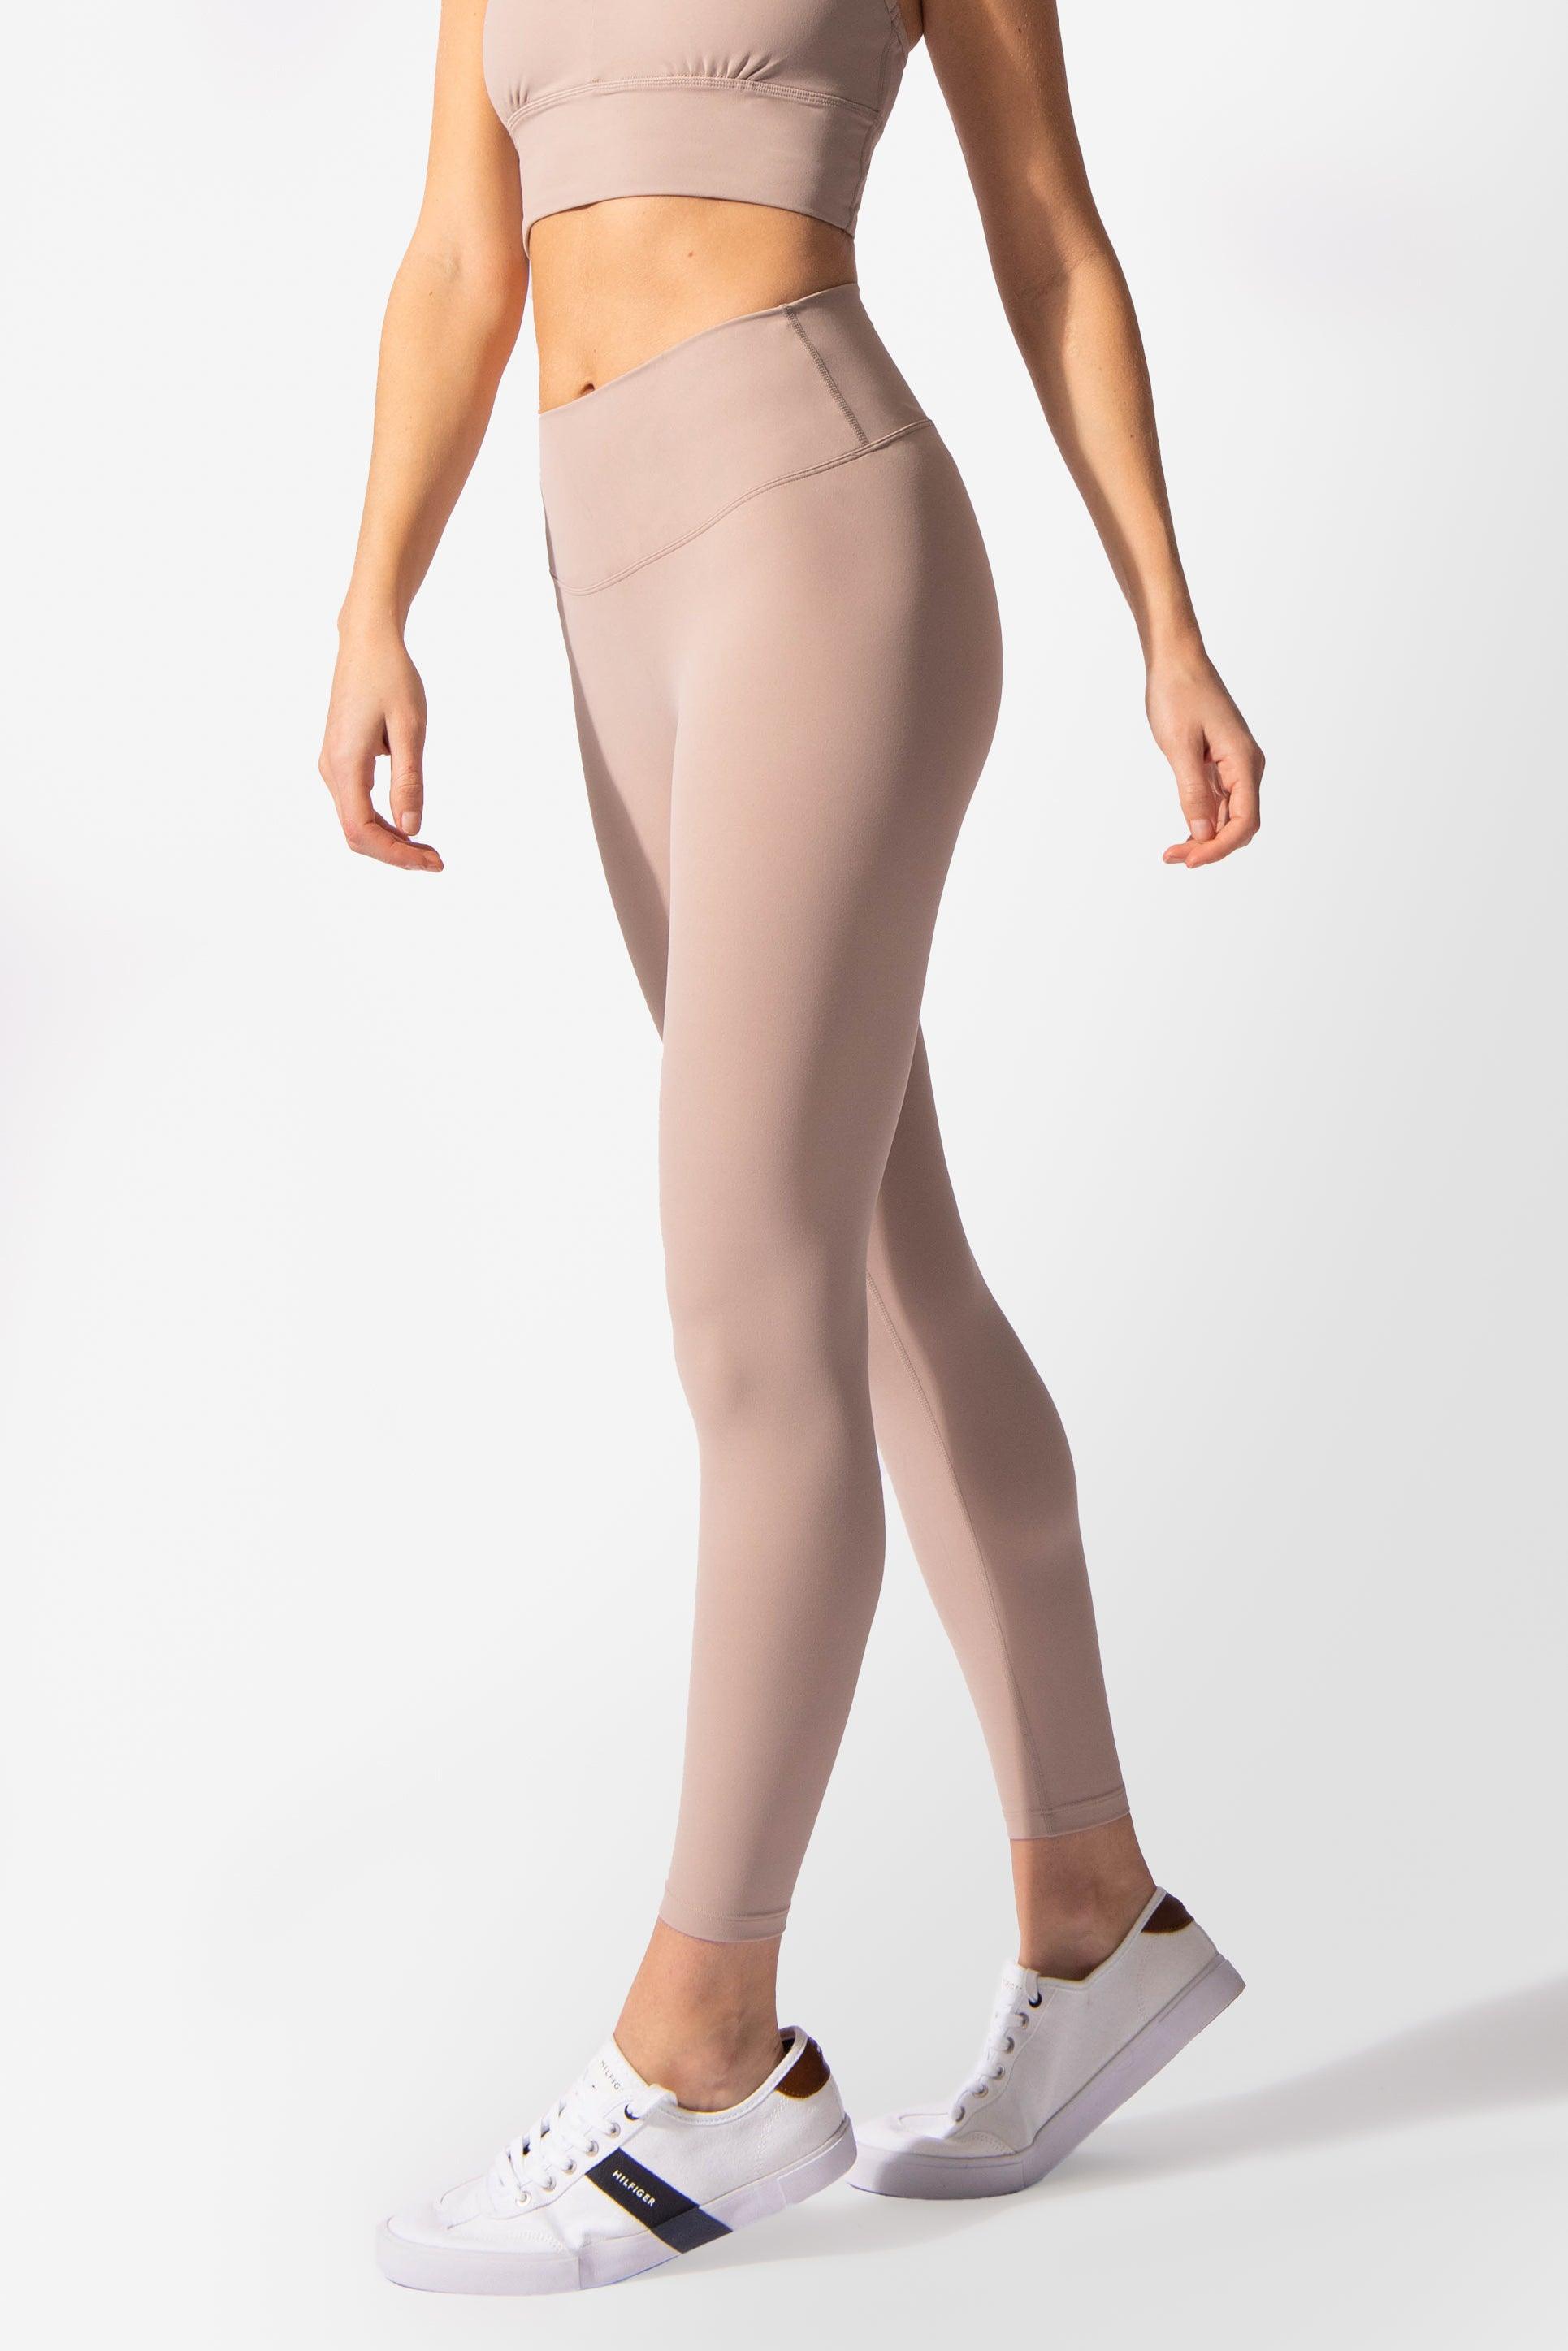 High Waist Airlift Legging 7/8 - Hearth and Soul